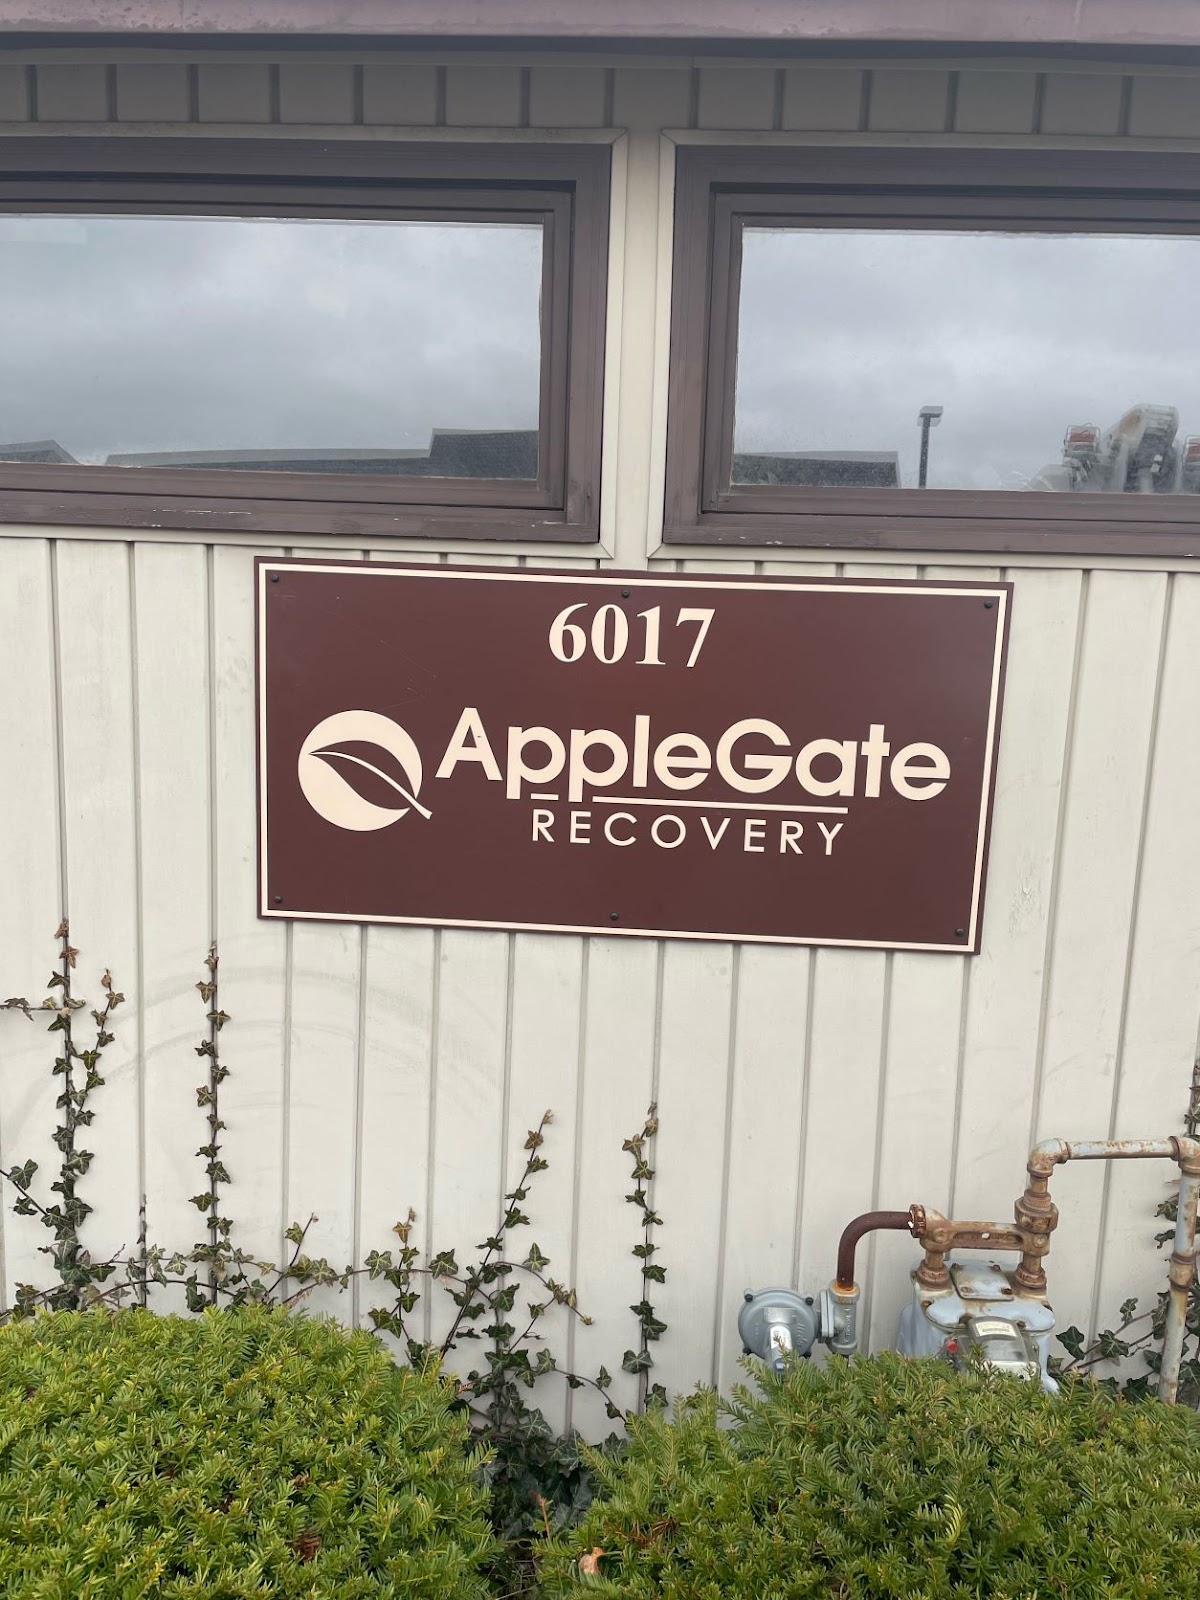 AppleGate Recovery